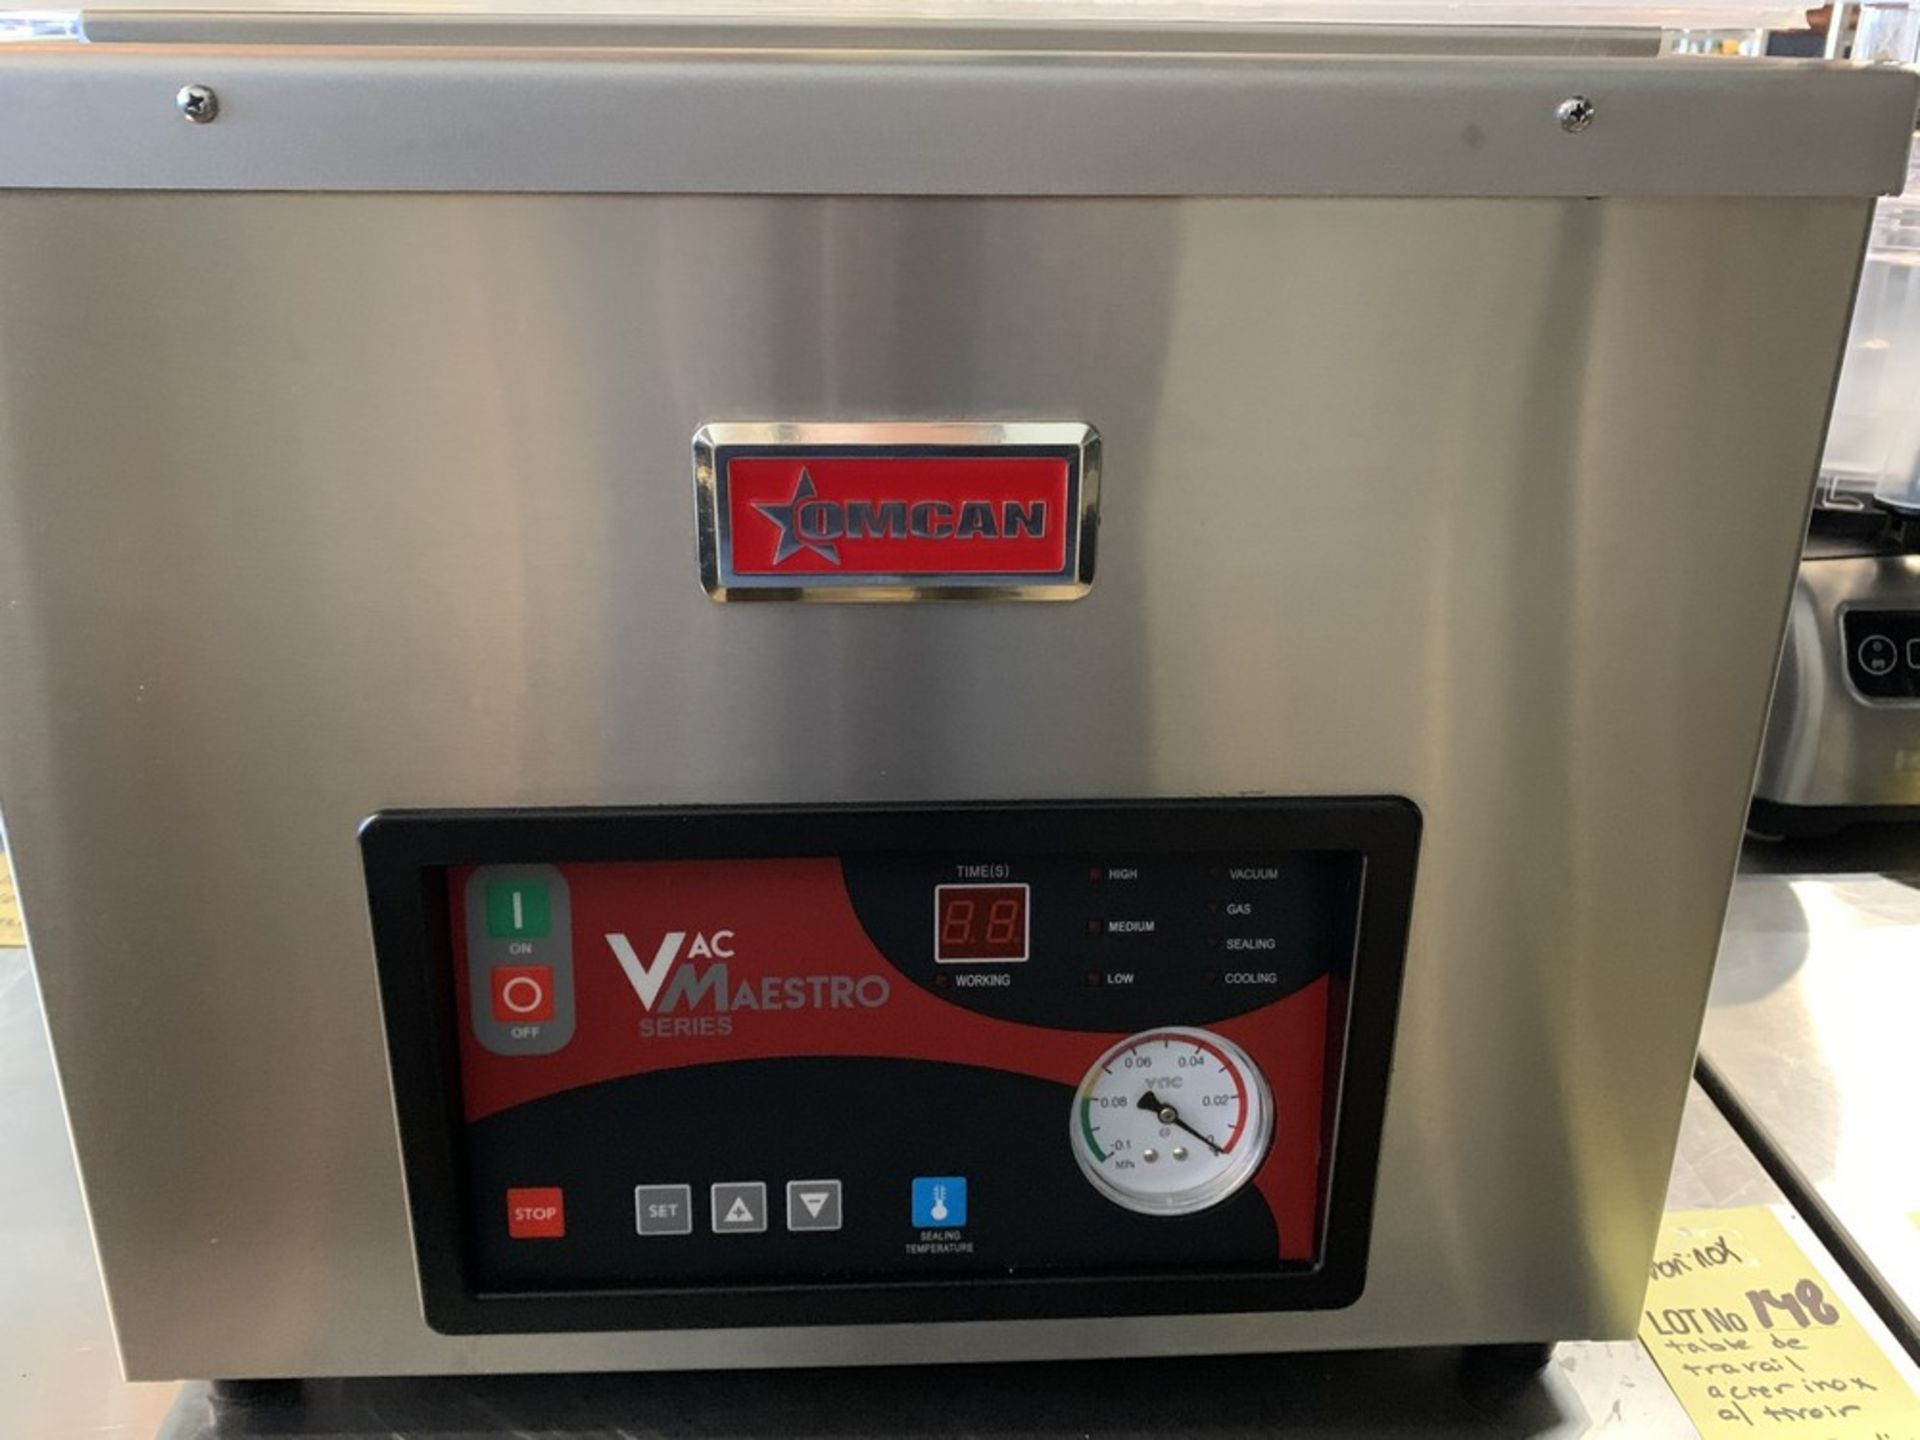 Machine emballeuse sous vide OMCAN VAC # MAESTRO eries # VPCN - 1066 - Image 2 of 4